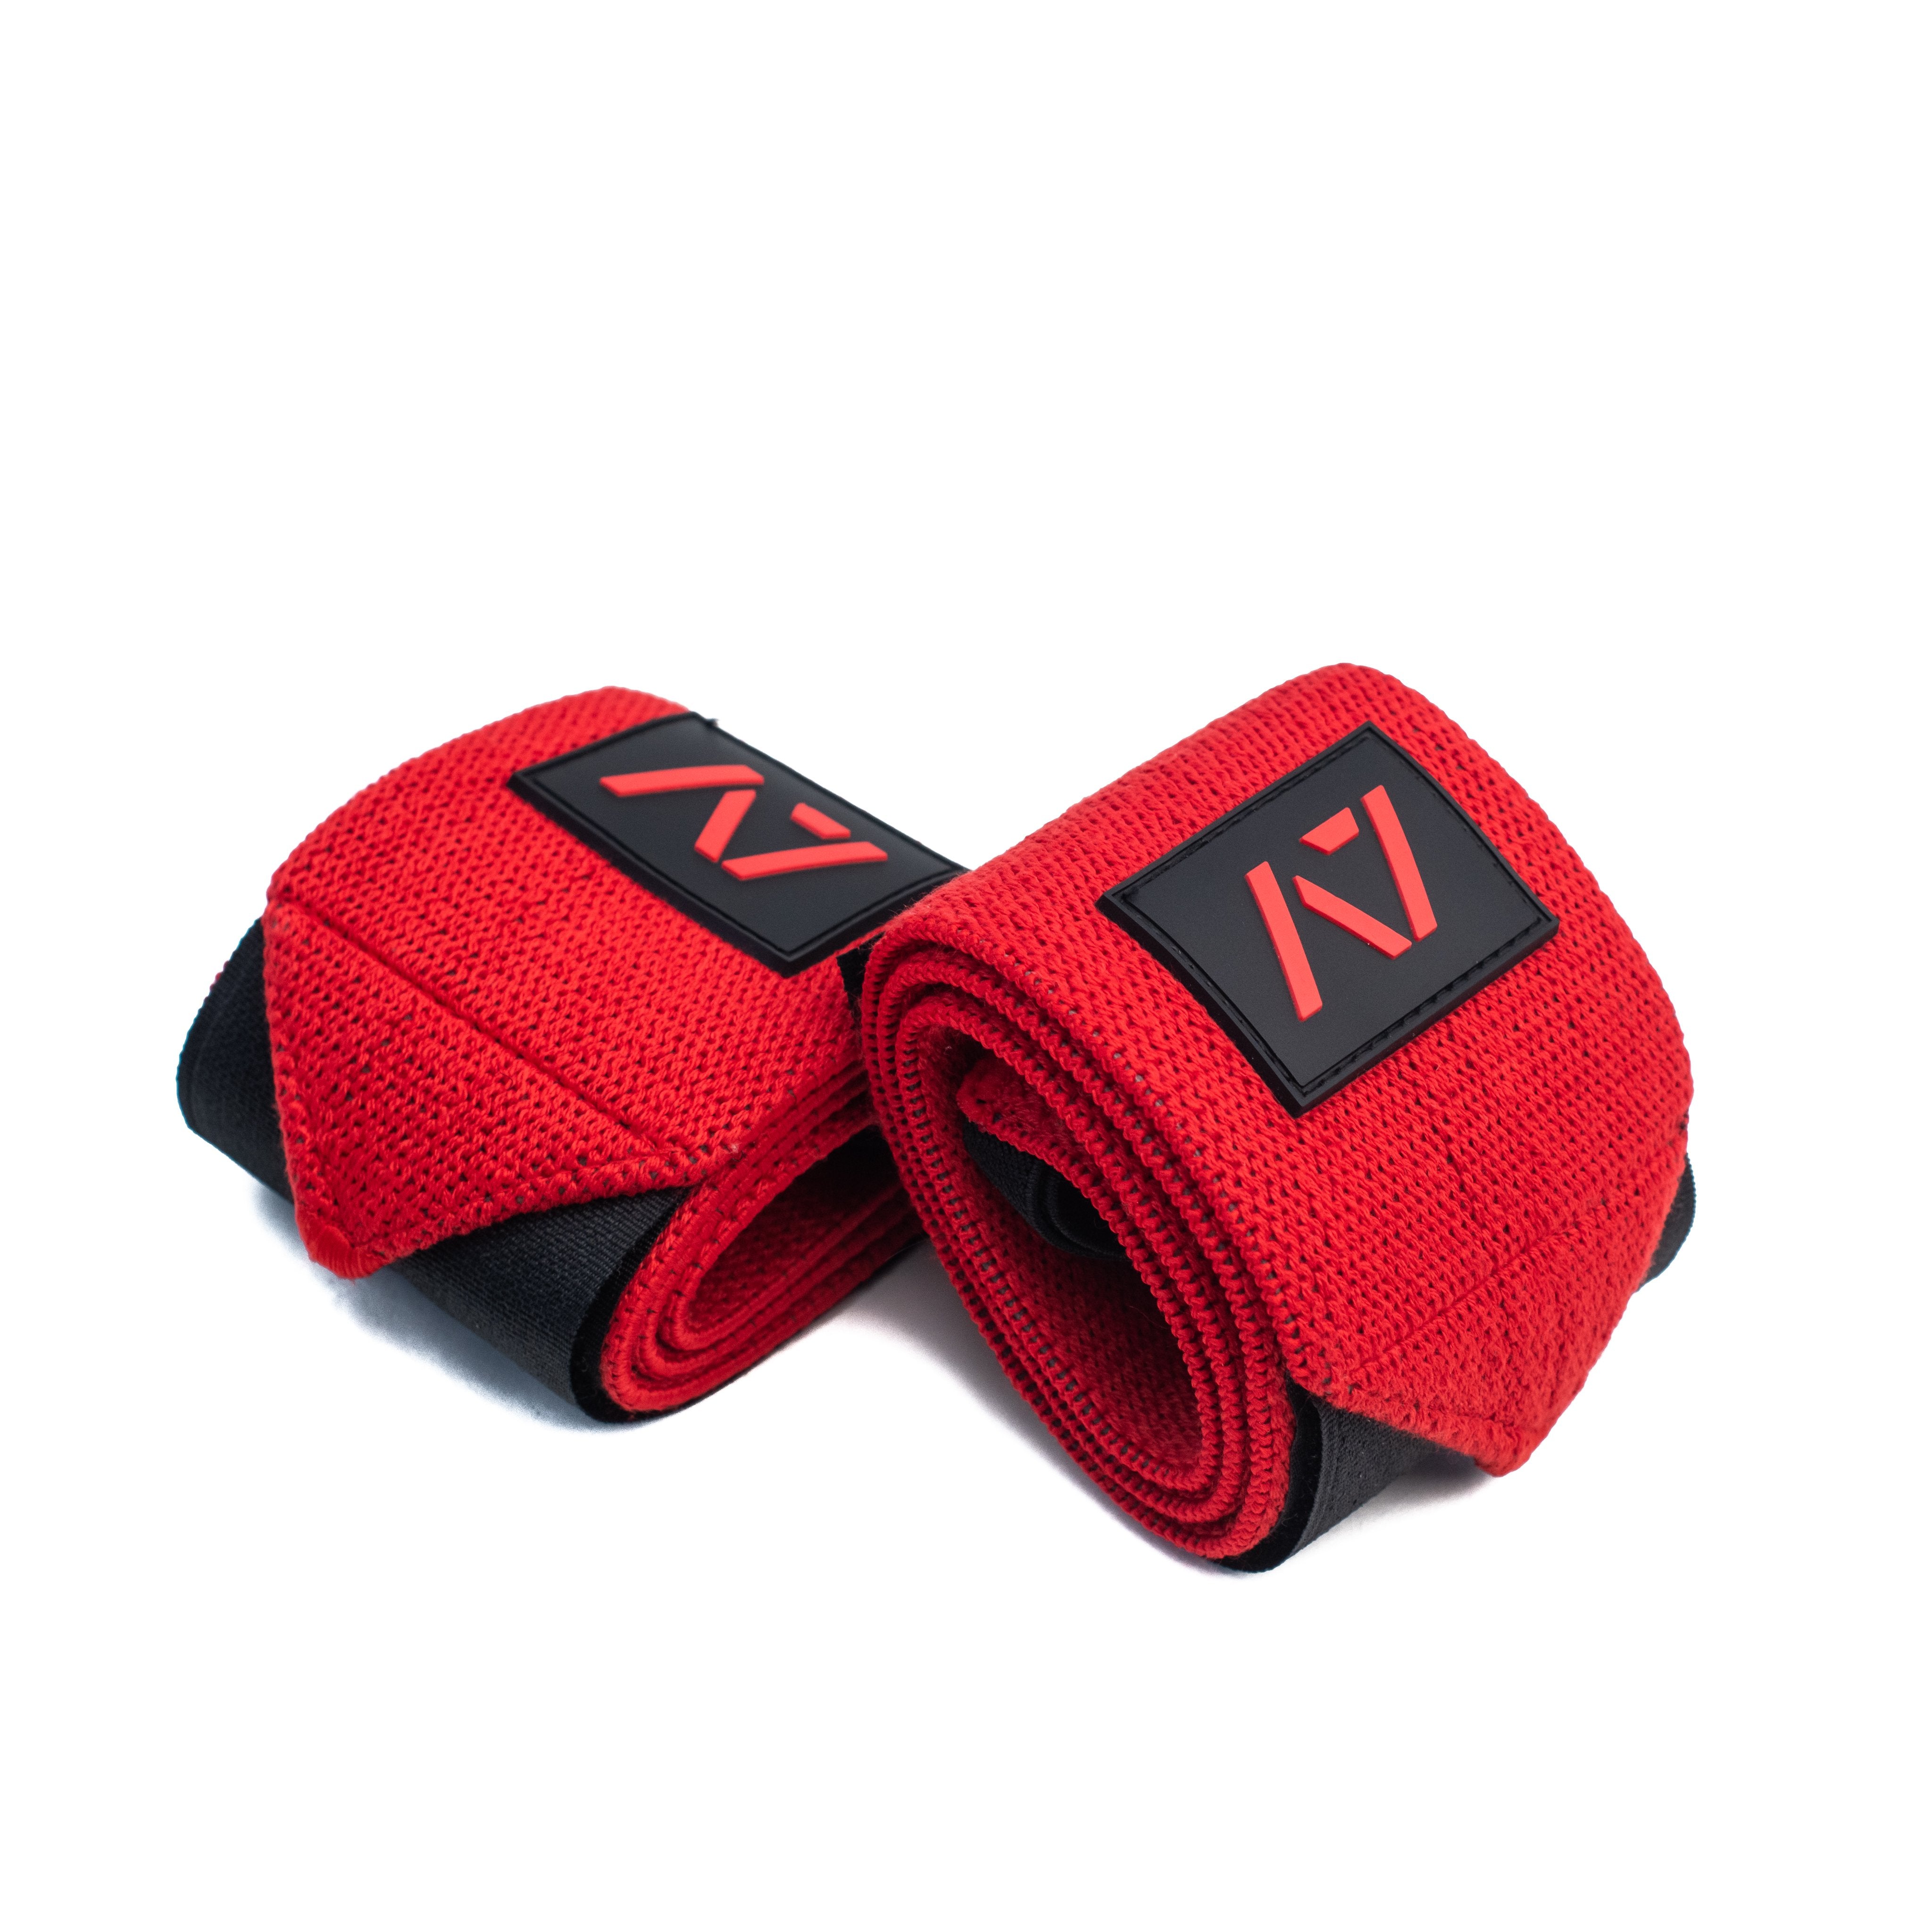 A7 Wrist Wraps are IPF approved. Inferno is the newest color combination to our Wrist Wraps. The classic black and red colorway you all loved in our FIRE USA meet tee can now partner with these wraps for a standout look like no other. Excited to see you set some new PBs in these wraps and show off your Inferno spirt from within. A7 wrist wraps are a perfect addition to your IPF approved kit..